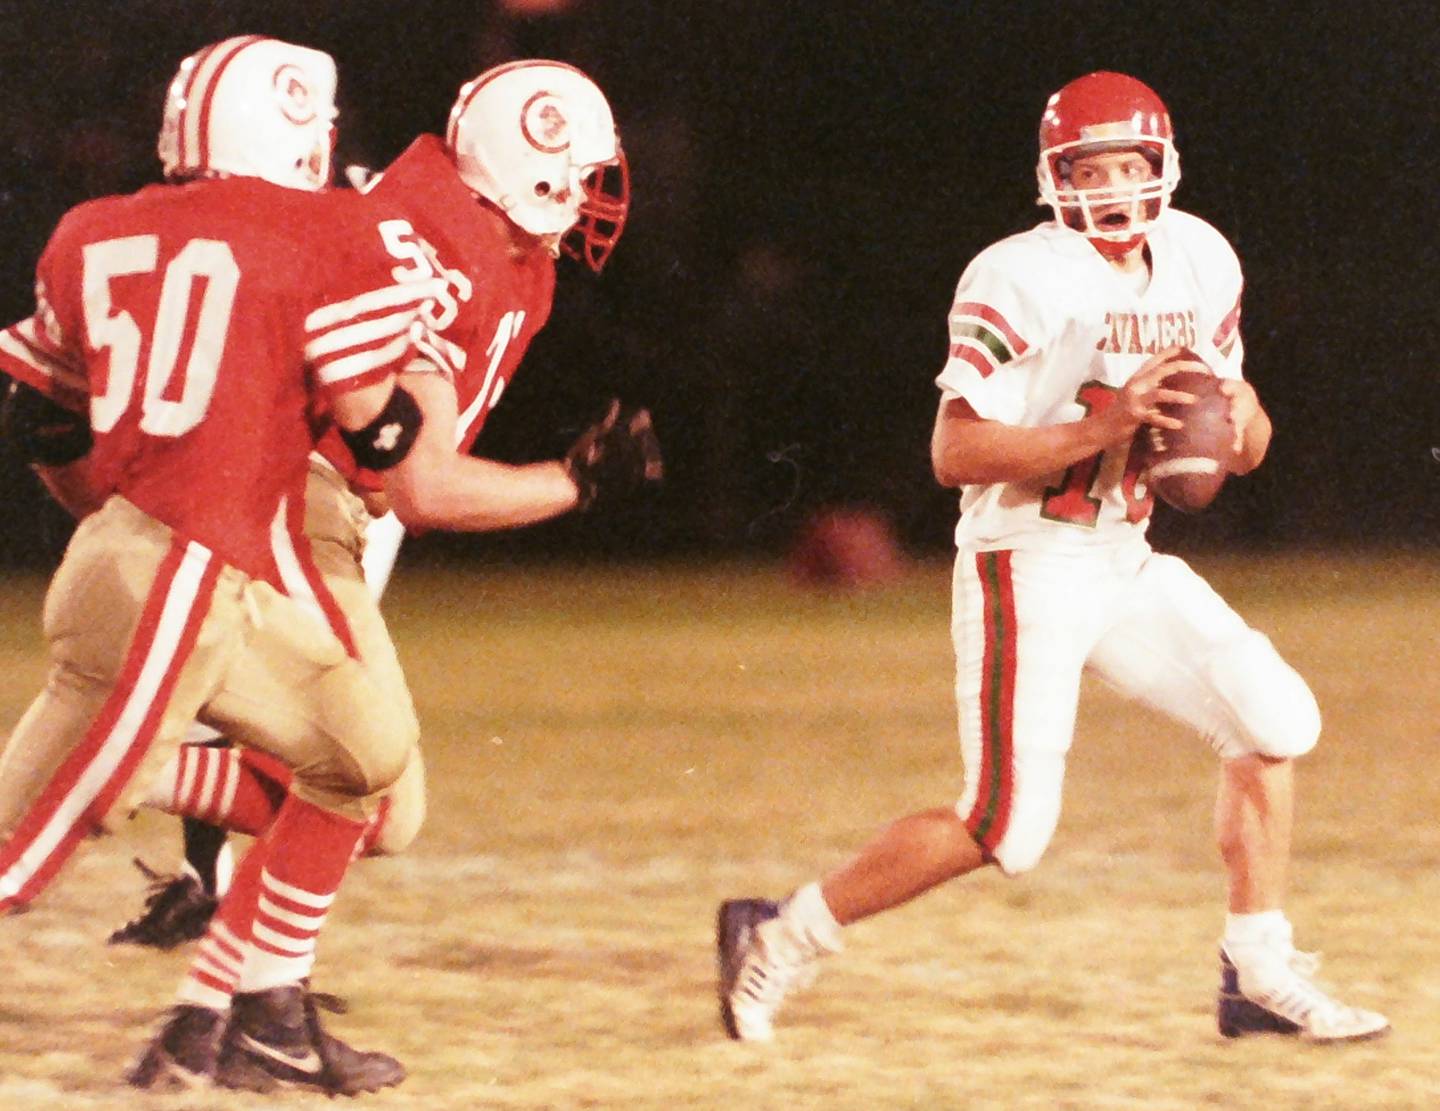 La Salle-Peru quarterback Eric Robertson looks to pass the ball as Ottawa defenders Brian Billings (50) and Wayne Johnson (76) look to sack him on Friday, Oct. 23, 1992 at King Field in Ottawa.